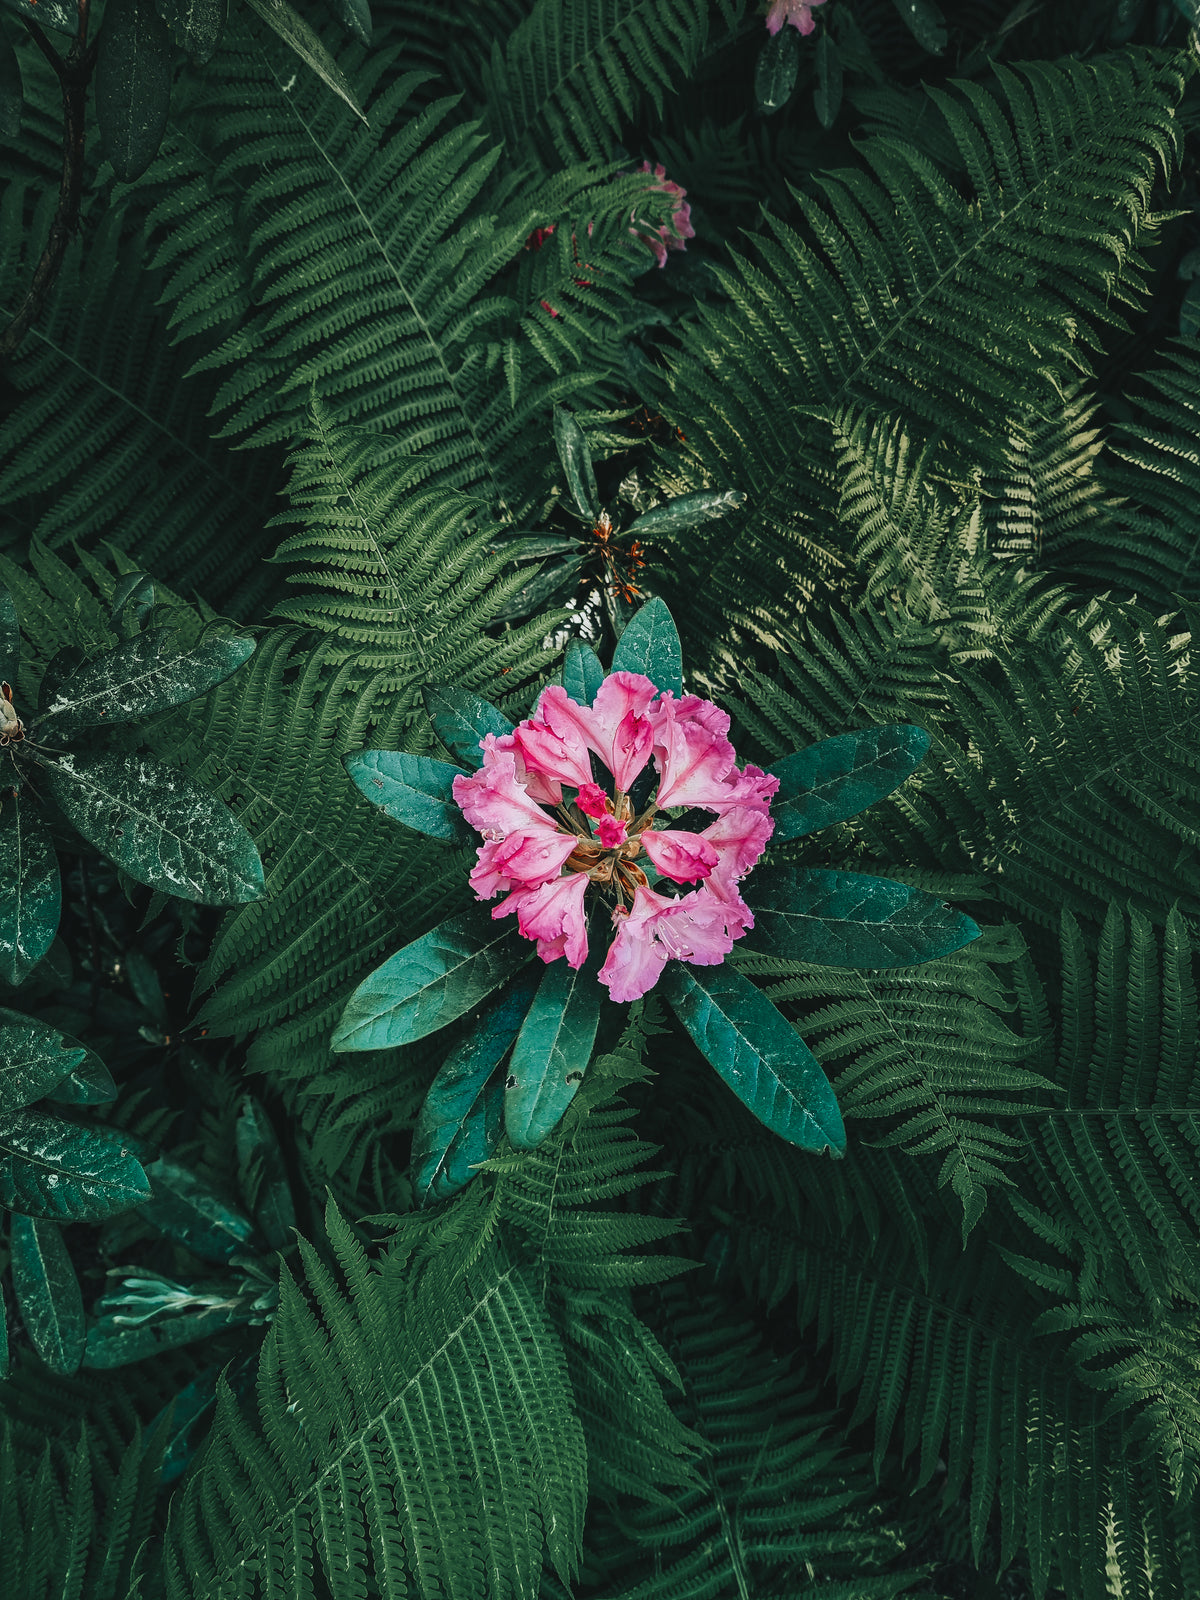 pink flower in bloom surrounded by ferns